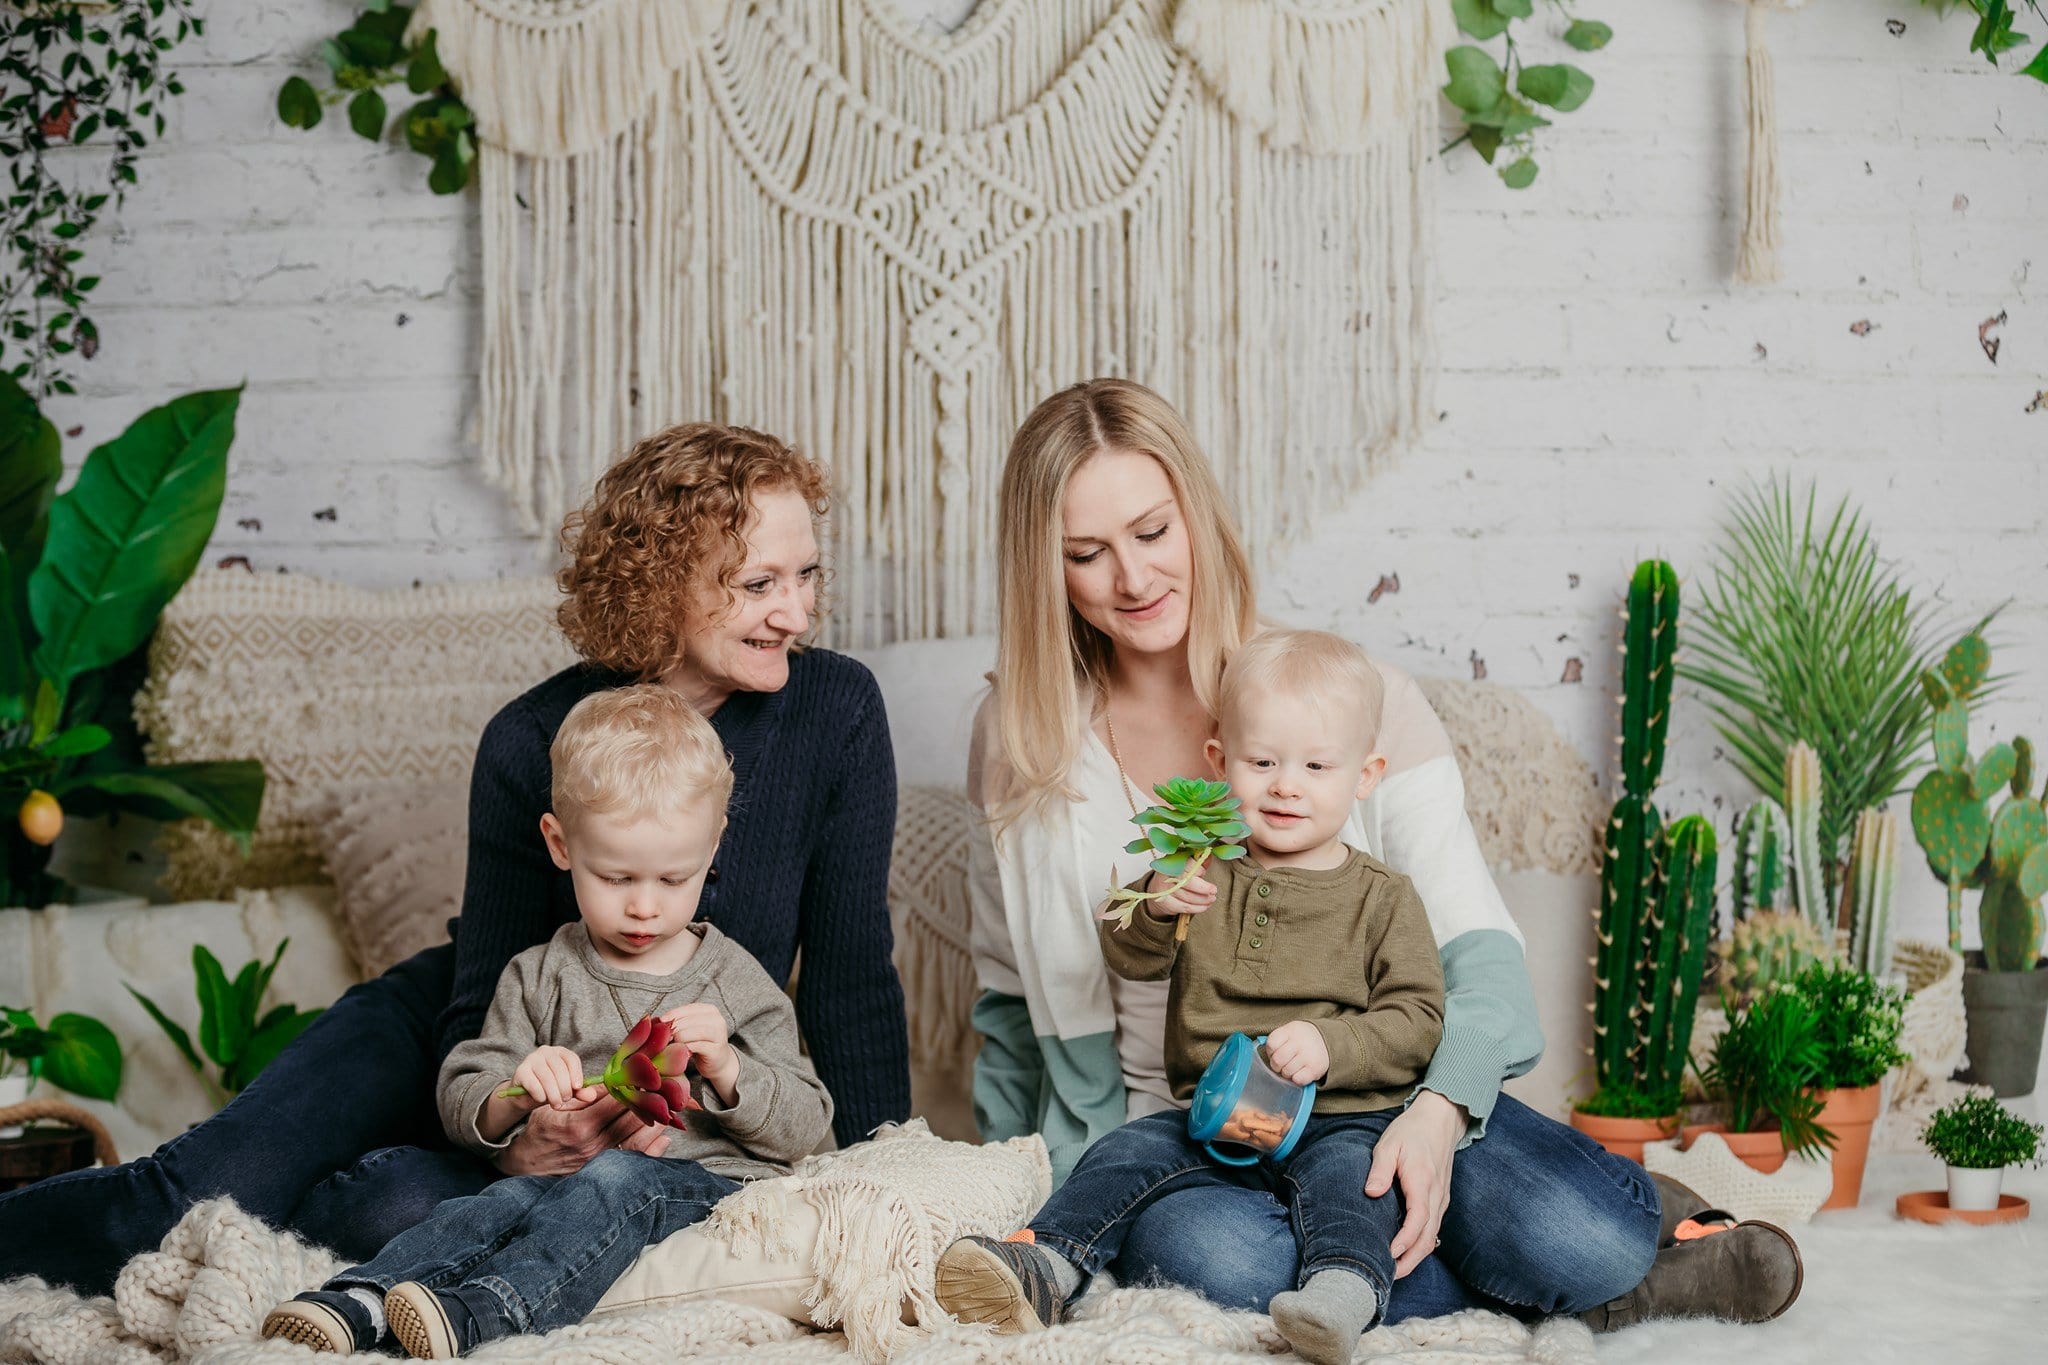 Kate Boho Macrame Floor Pillows with Plants Spring/mother's Day Backdrop Designed By Mandy Ringe Photography - Kate Backdrop